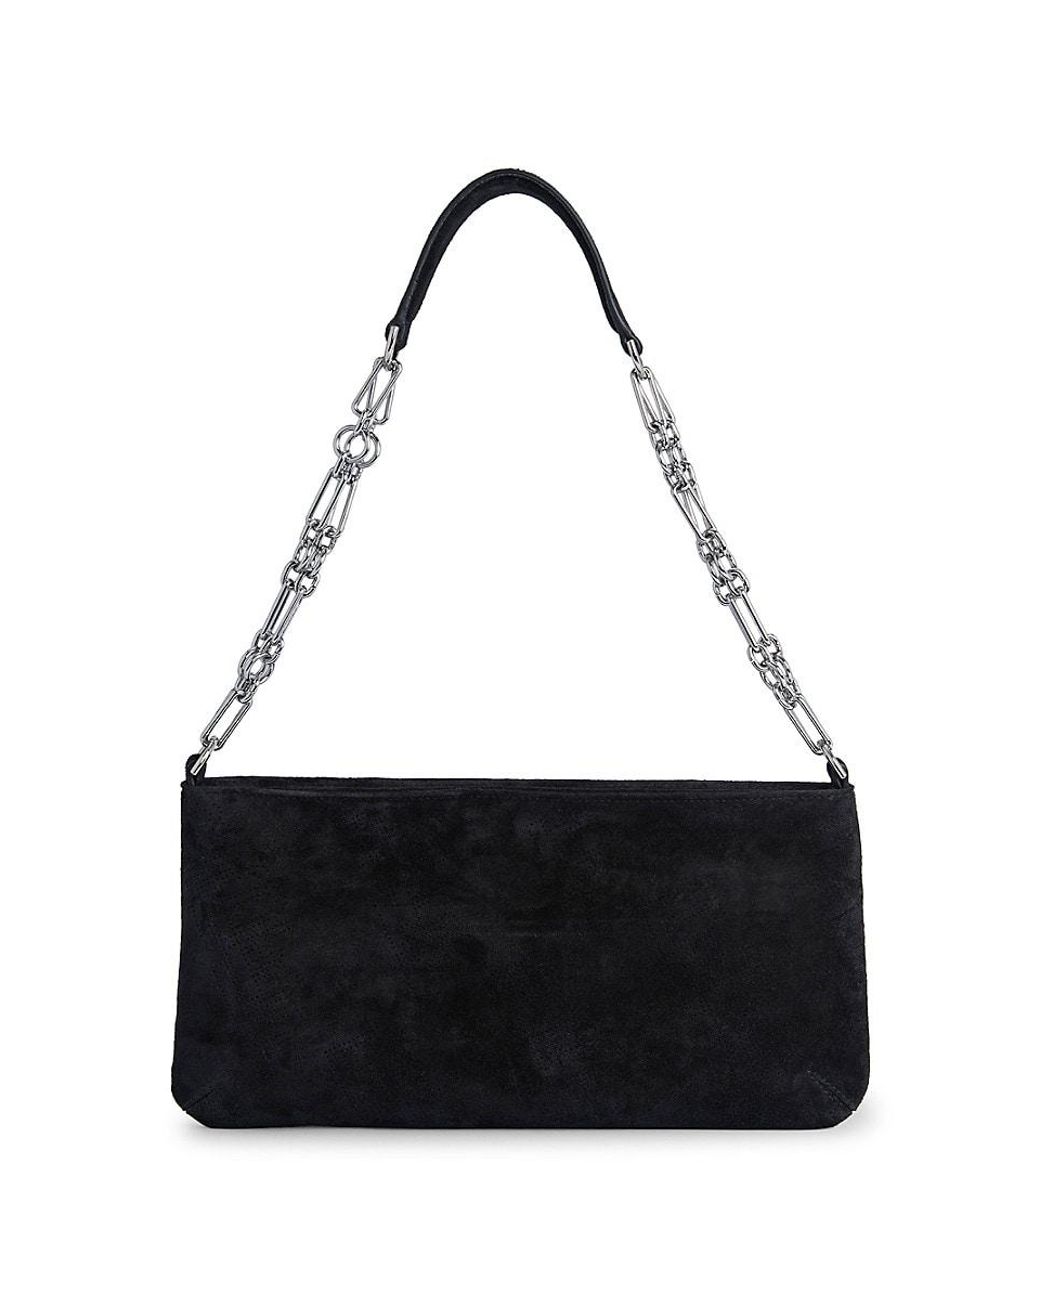 BY FAR Holly Perforated Suede Shoulder Bag in Black | Lyst